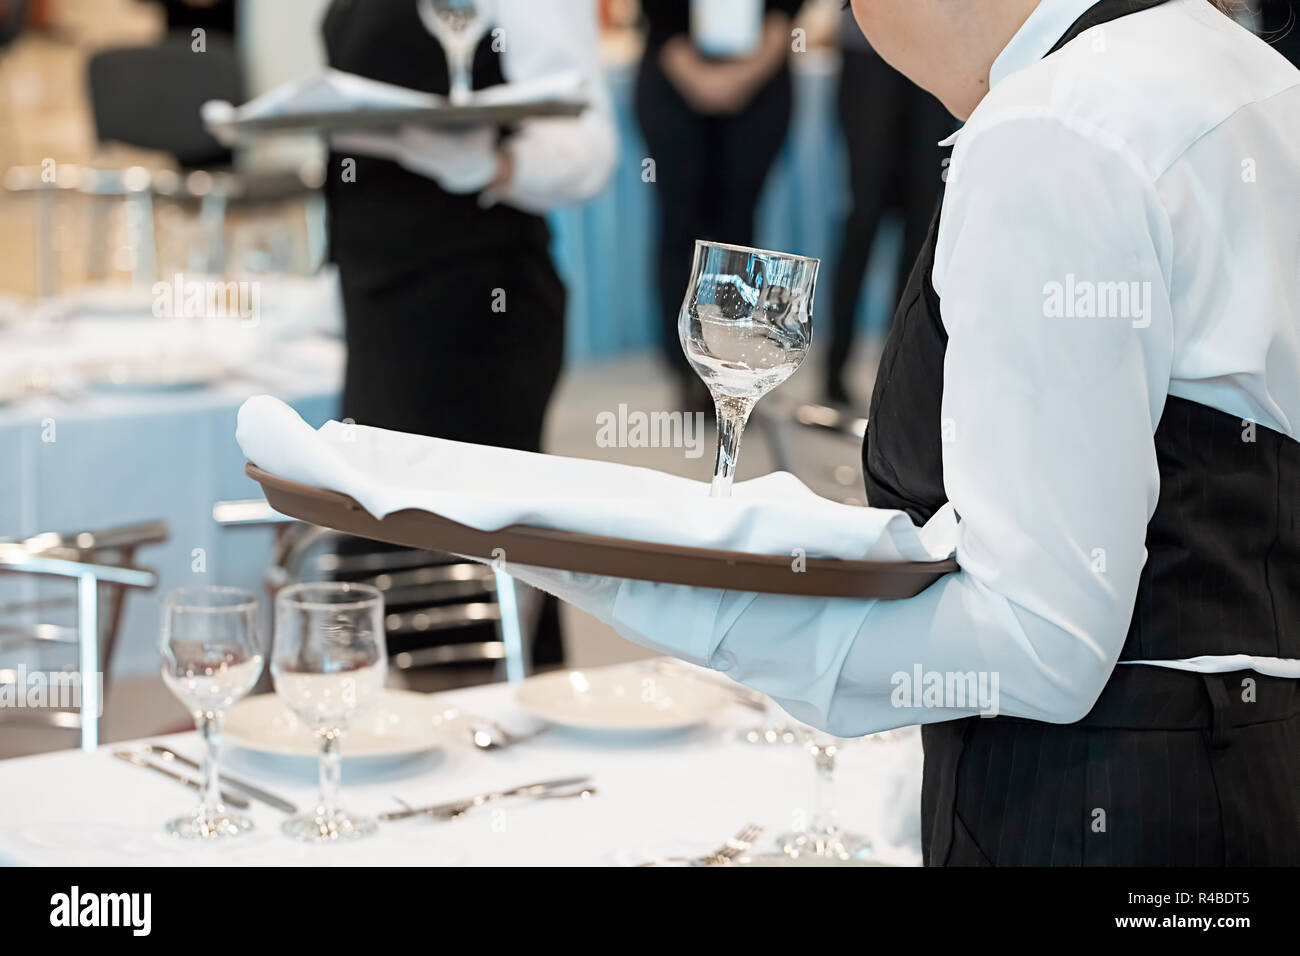 Waitress dressed in the uniform serving a set of wine glasses Stock Photo